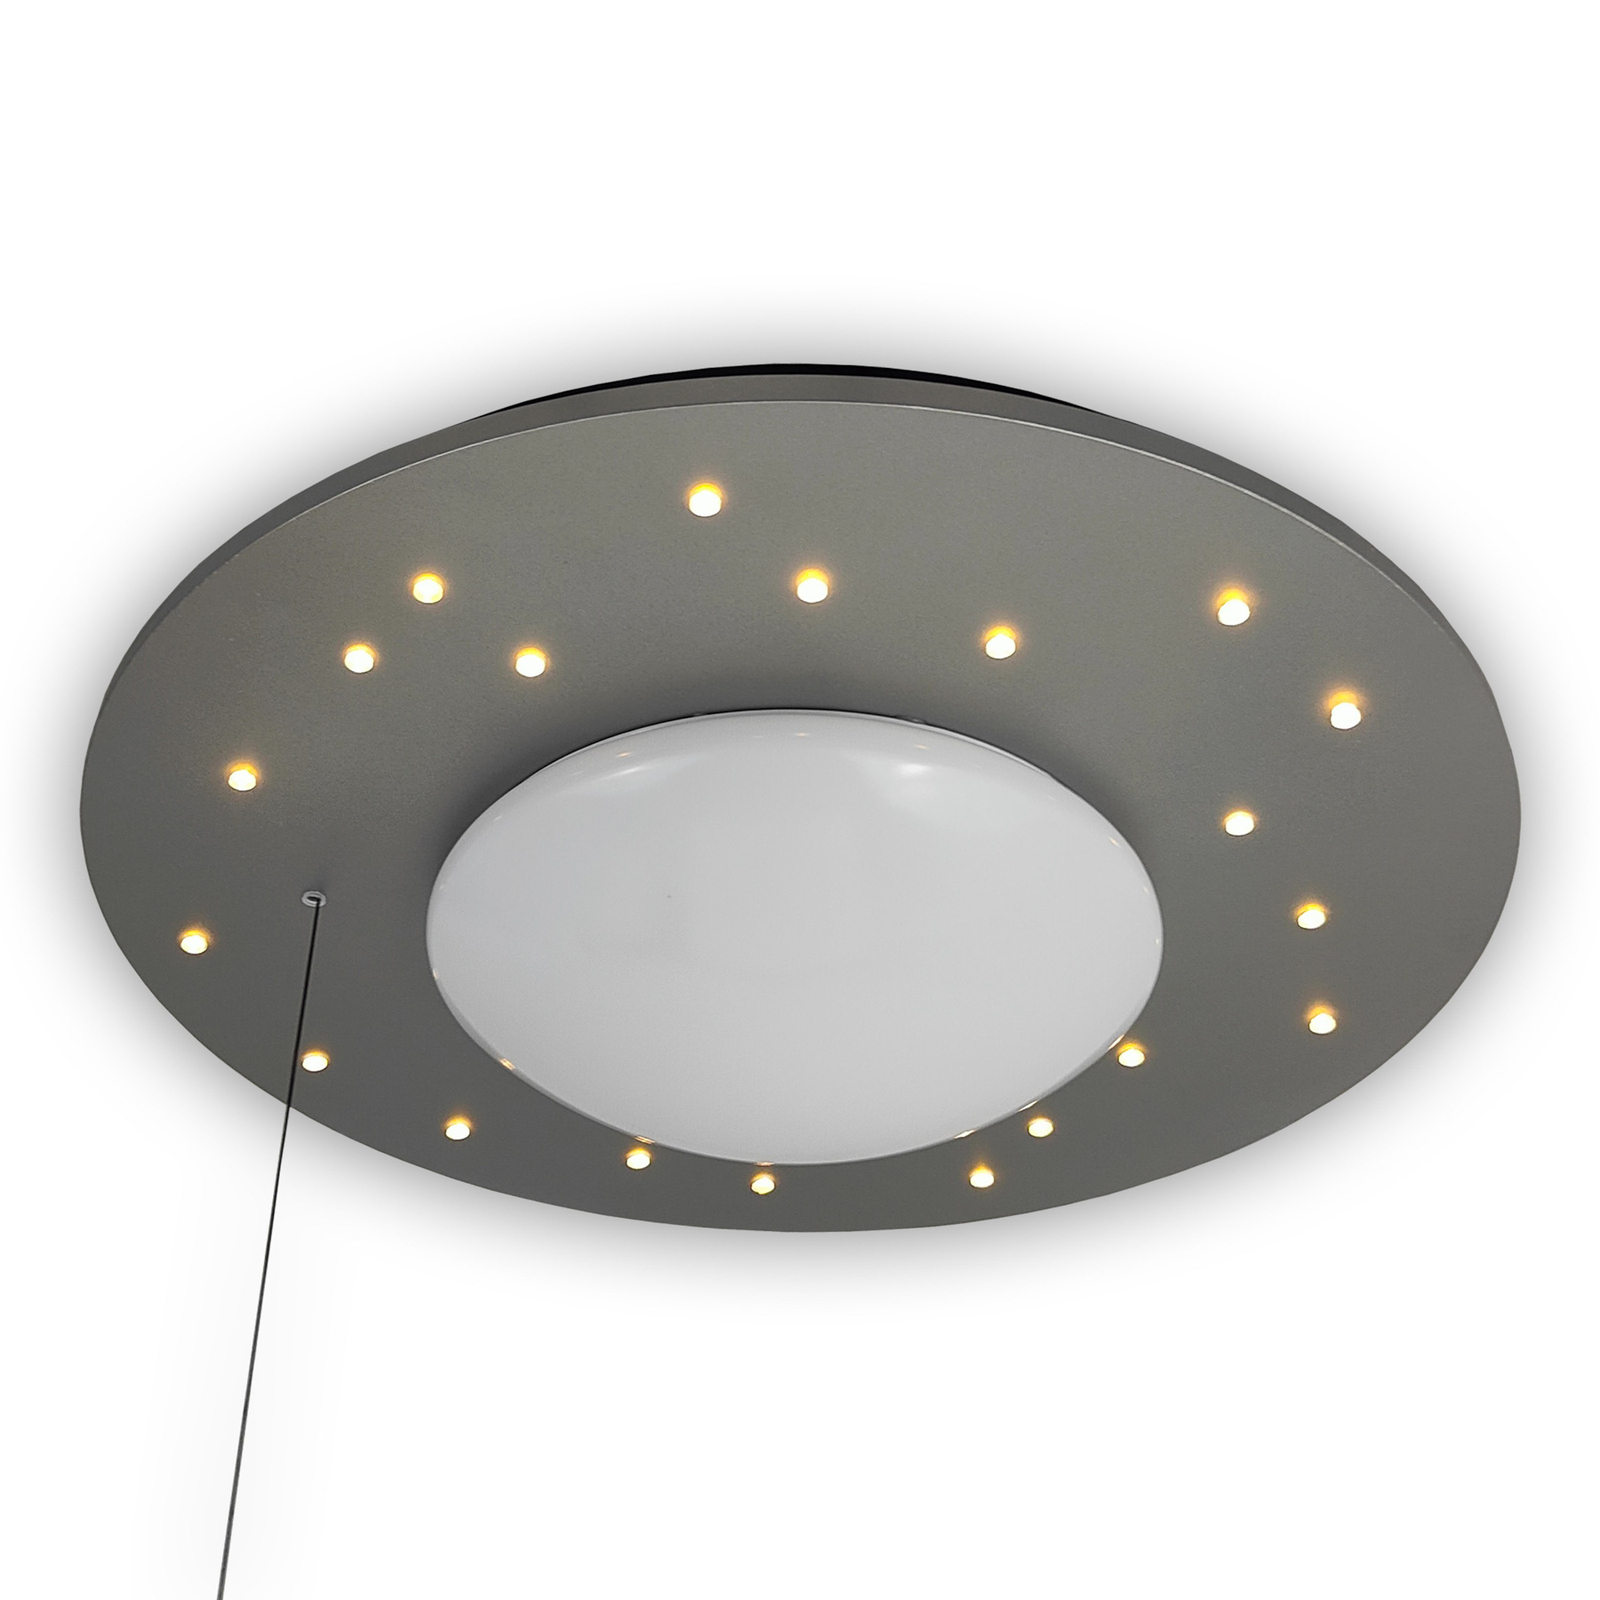 Starlight ceiling light with a starry sky, silver